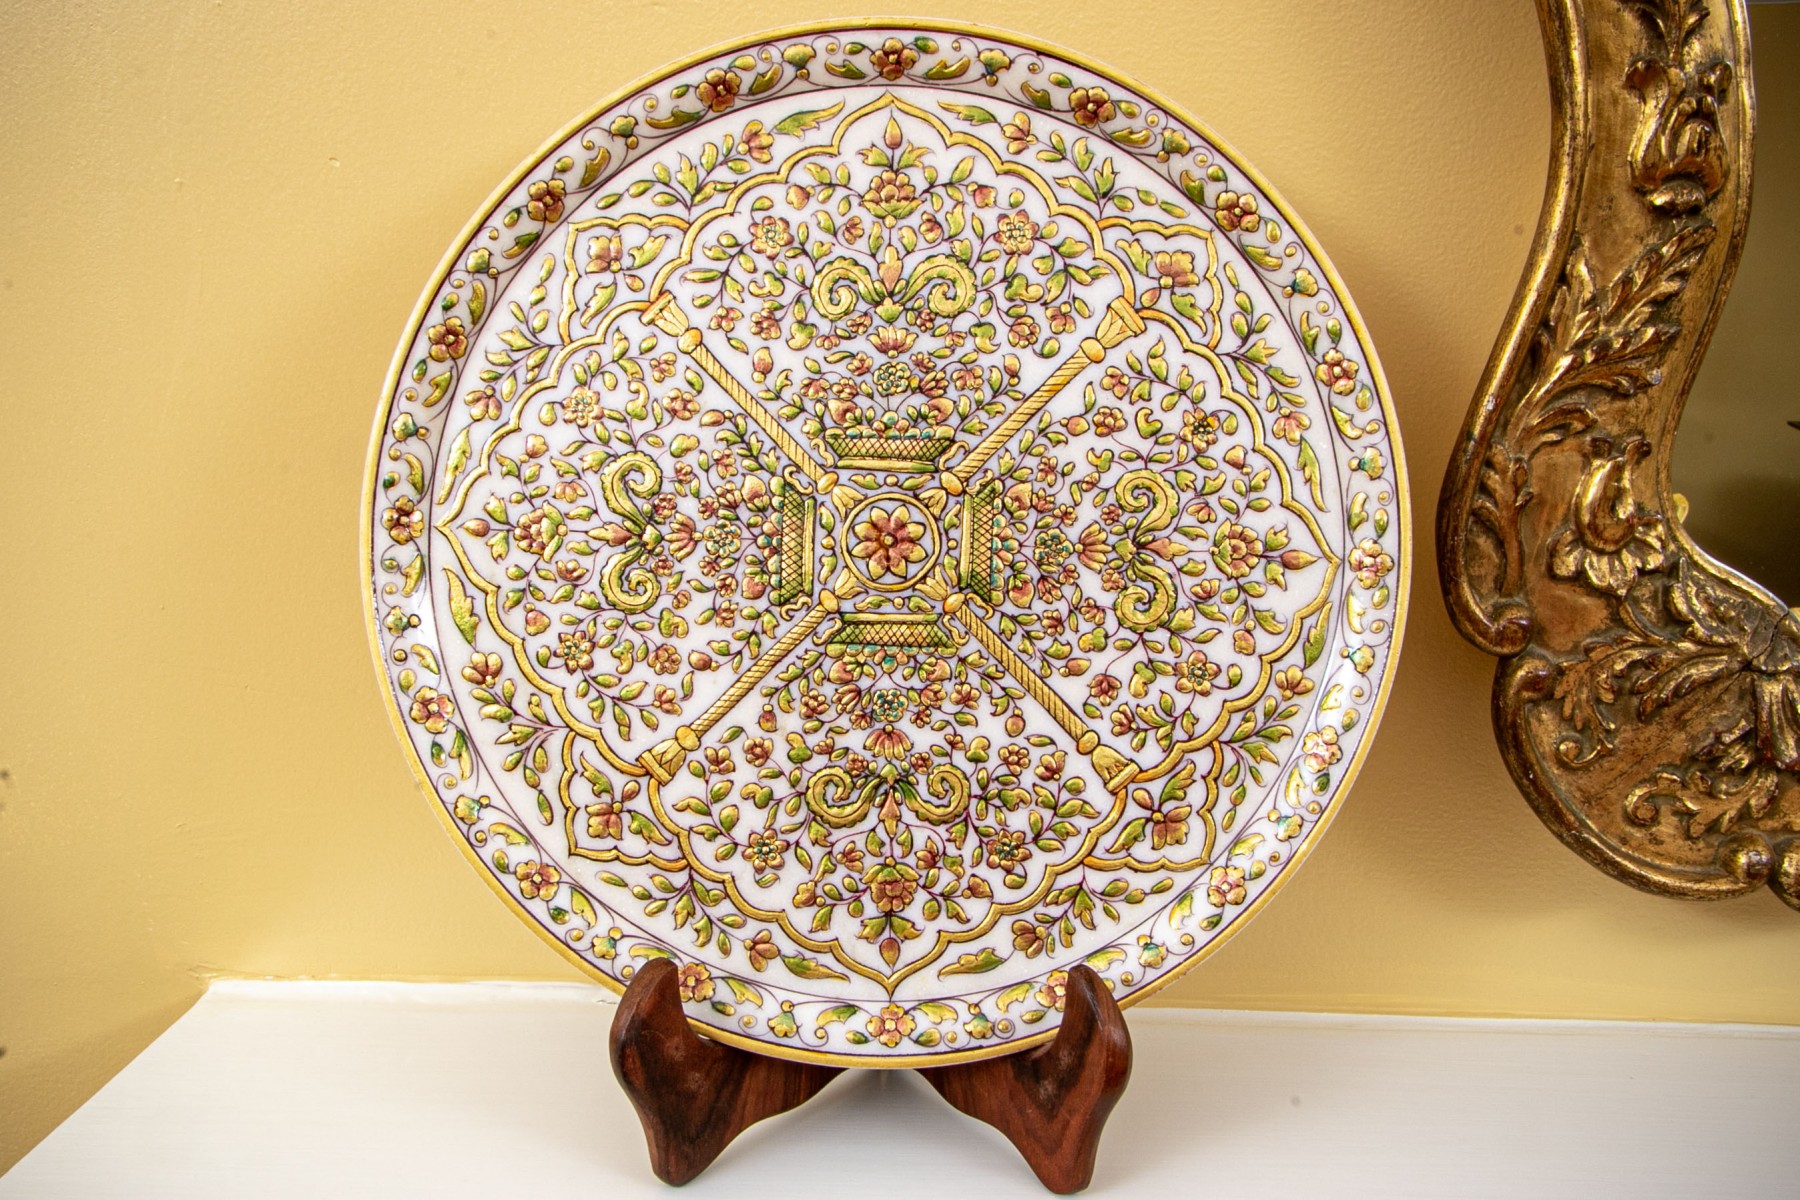 a colorful antique dish sold on an AuctionNinja marketplace.